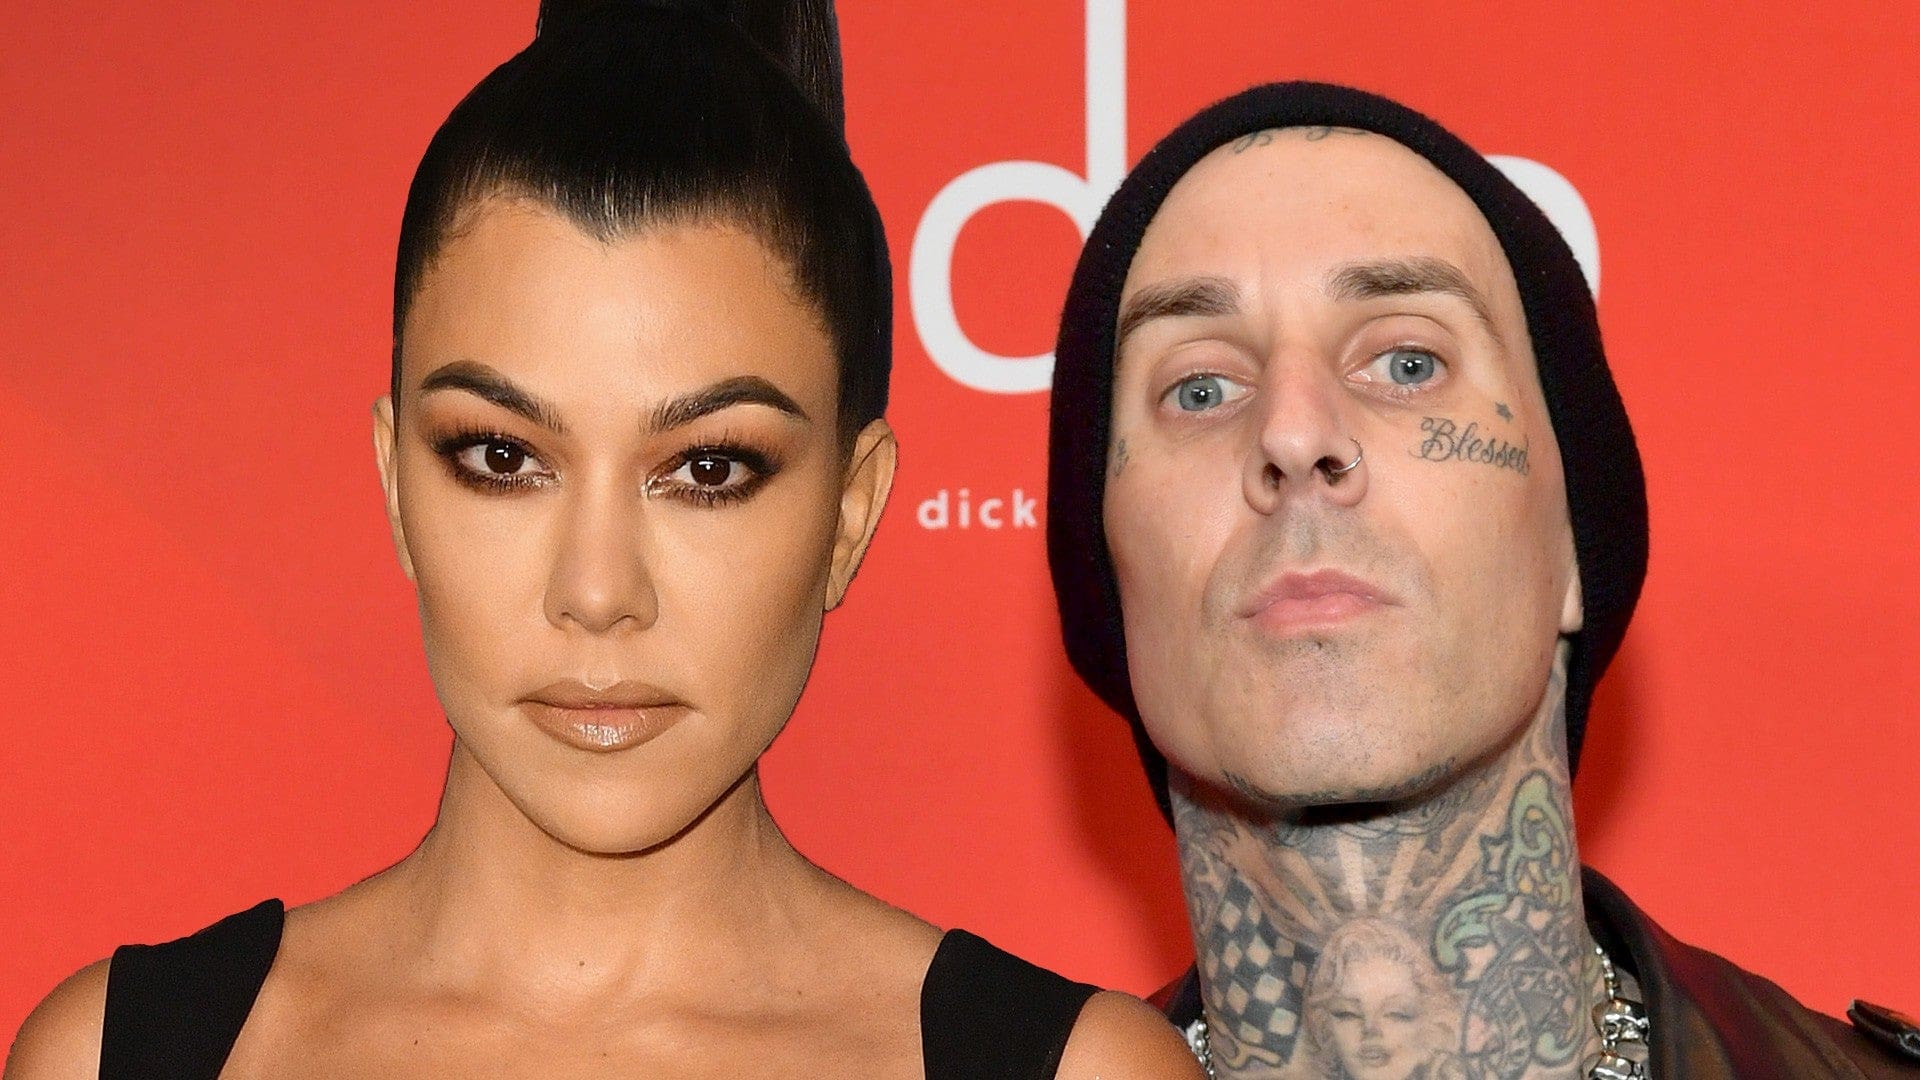 Kourtney Kardashian And Travis Barker Are Now Instagram-Official - See Their Photo